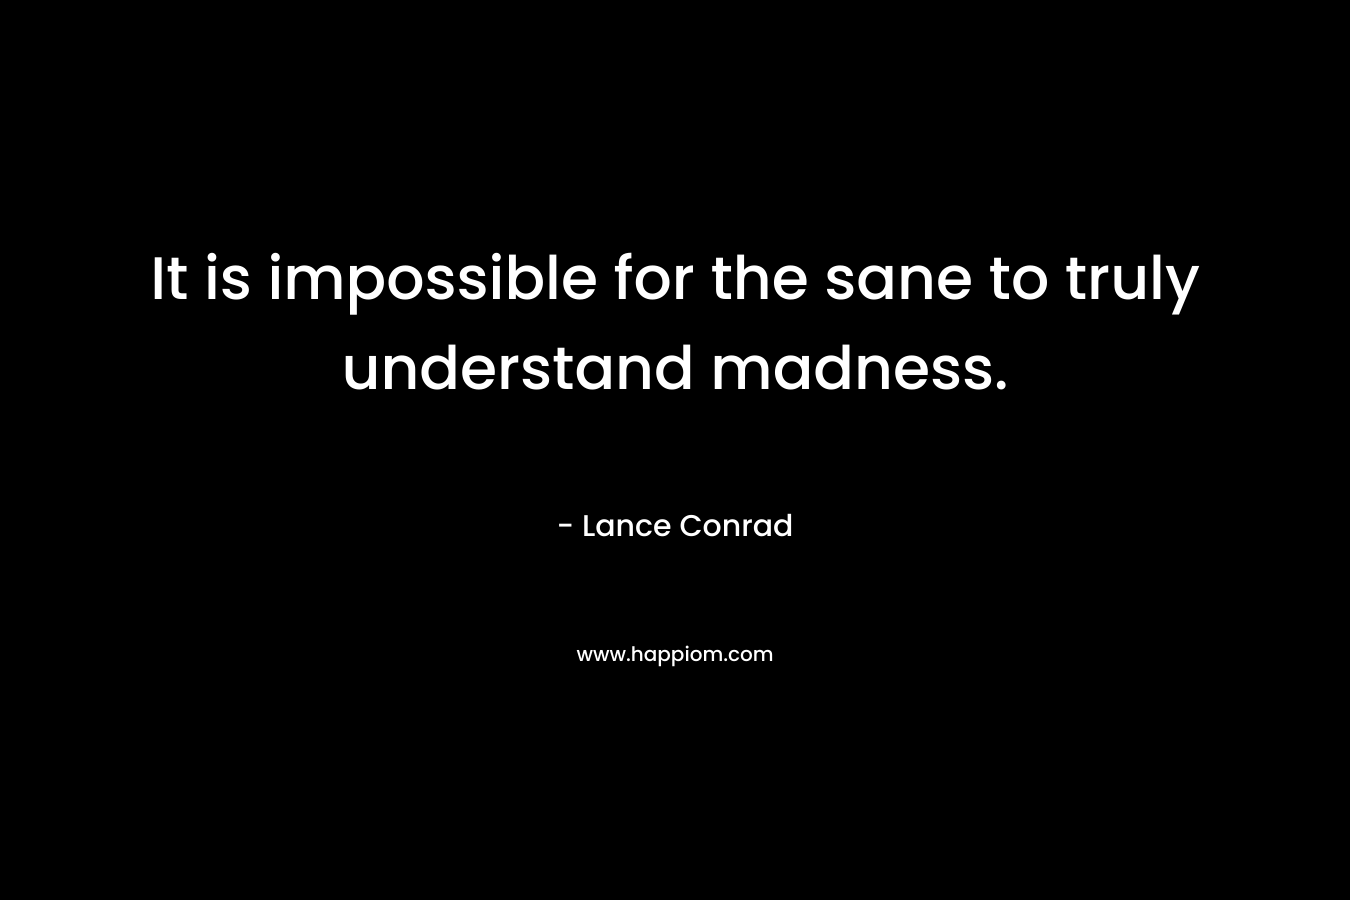 It is impossible for the sane to truly understand madness. – Lance Conrad